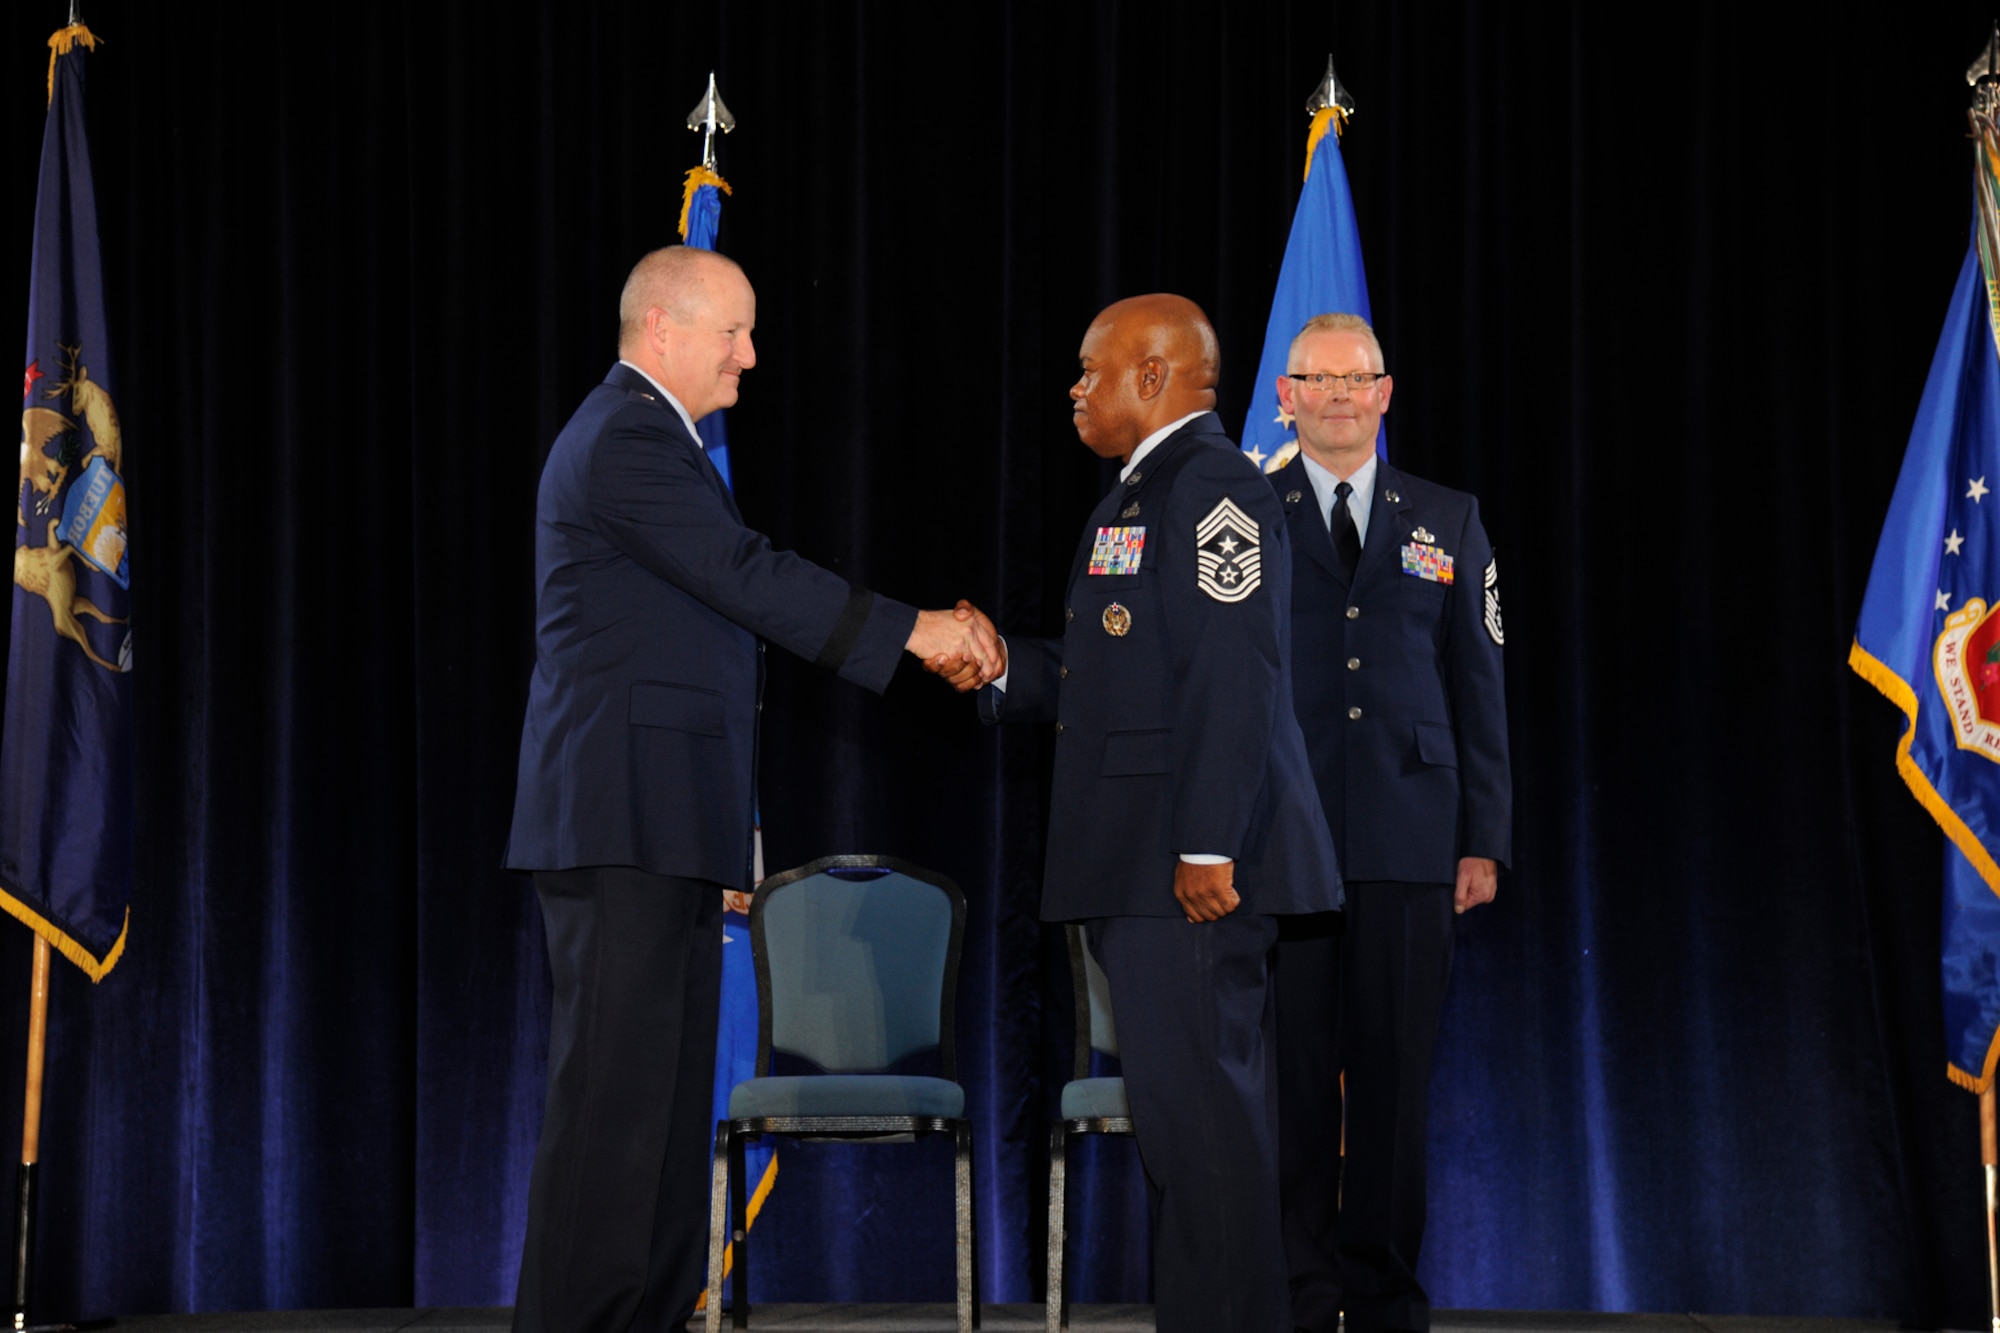 Brig. Gen. John D. Slocum, 127th Wing commander, shakes hands with newly-appointed 127th Wing Command Chief Master Sgt. Tony Whitehead during the 127th Wing Annual Awards Ceremony at Selfridge Air National Guard Base, Mich., Dec. 5, 2015. Behind Slocum and Whitehead is Chief Master Sgt. Robert Dobson, who completed his service as the Wing’s command chief during the ceremony. (U.S. Air National Guard photo by Senior Airman Ryan Zeski)